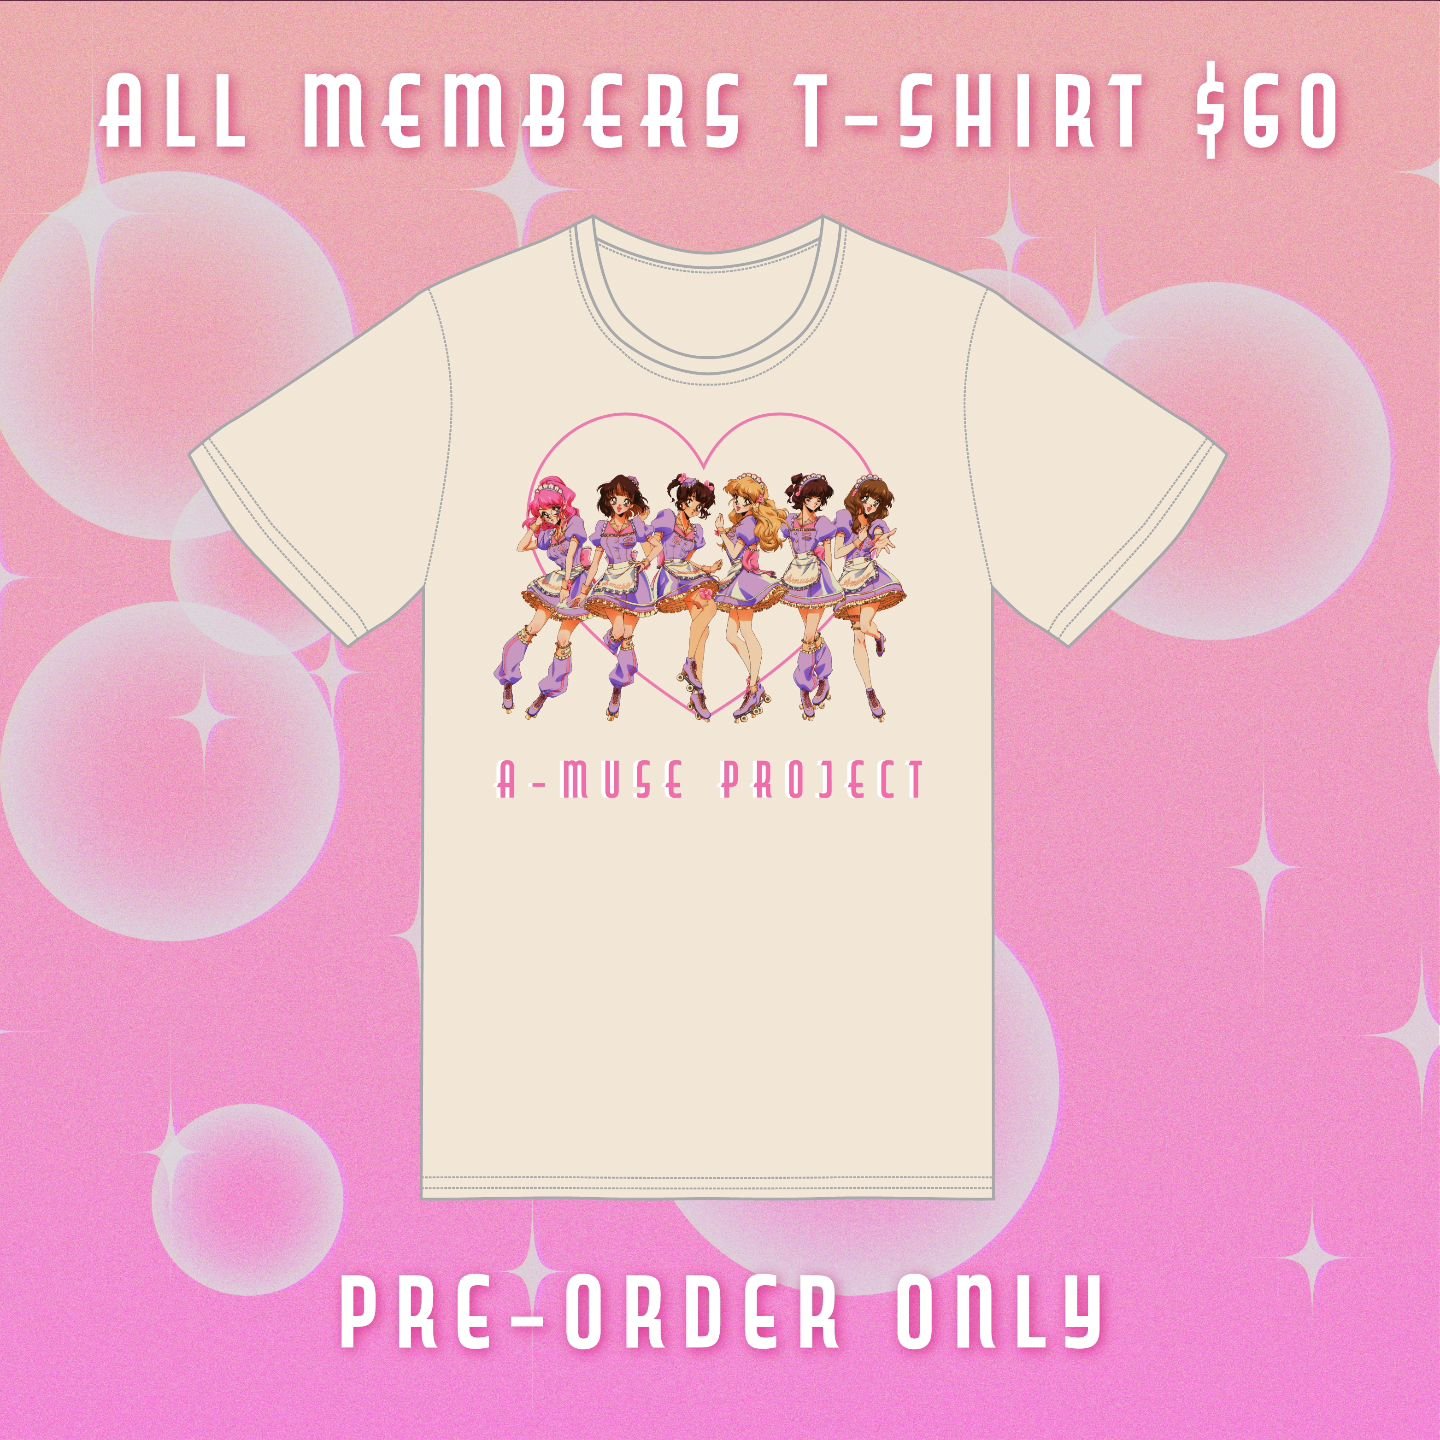 🚨 MERCH ALERT 🚨 Show your A-Muse oshi some love with our exclusive Happy Hour apparell 🥂

This line, featuring our gorgeous character designs by @hearthaaaa , will go on sale at 6pm on the 11th of May! These are available for pre-order only 🙅&zwj